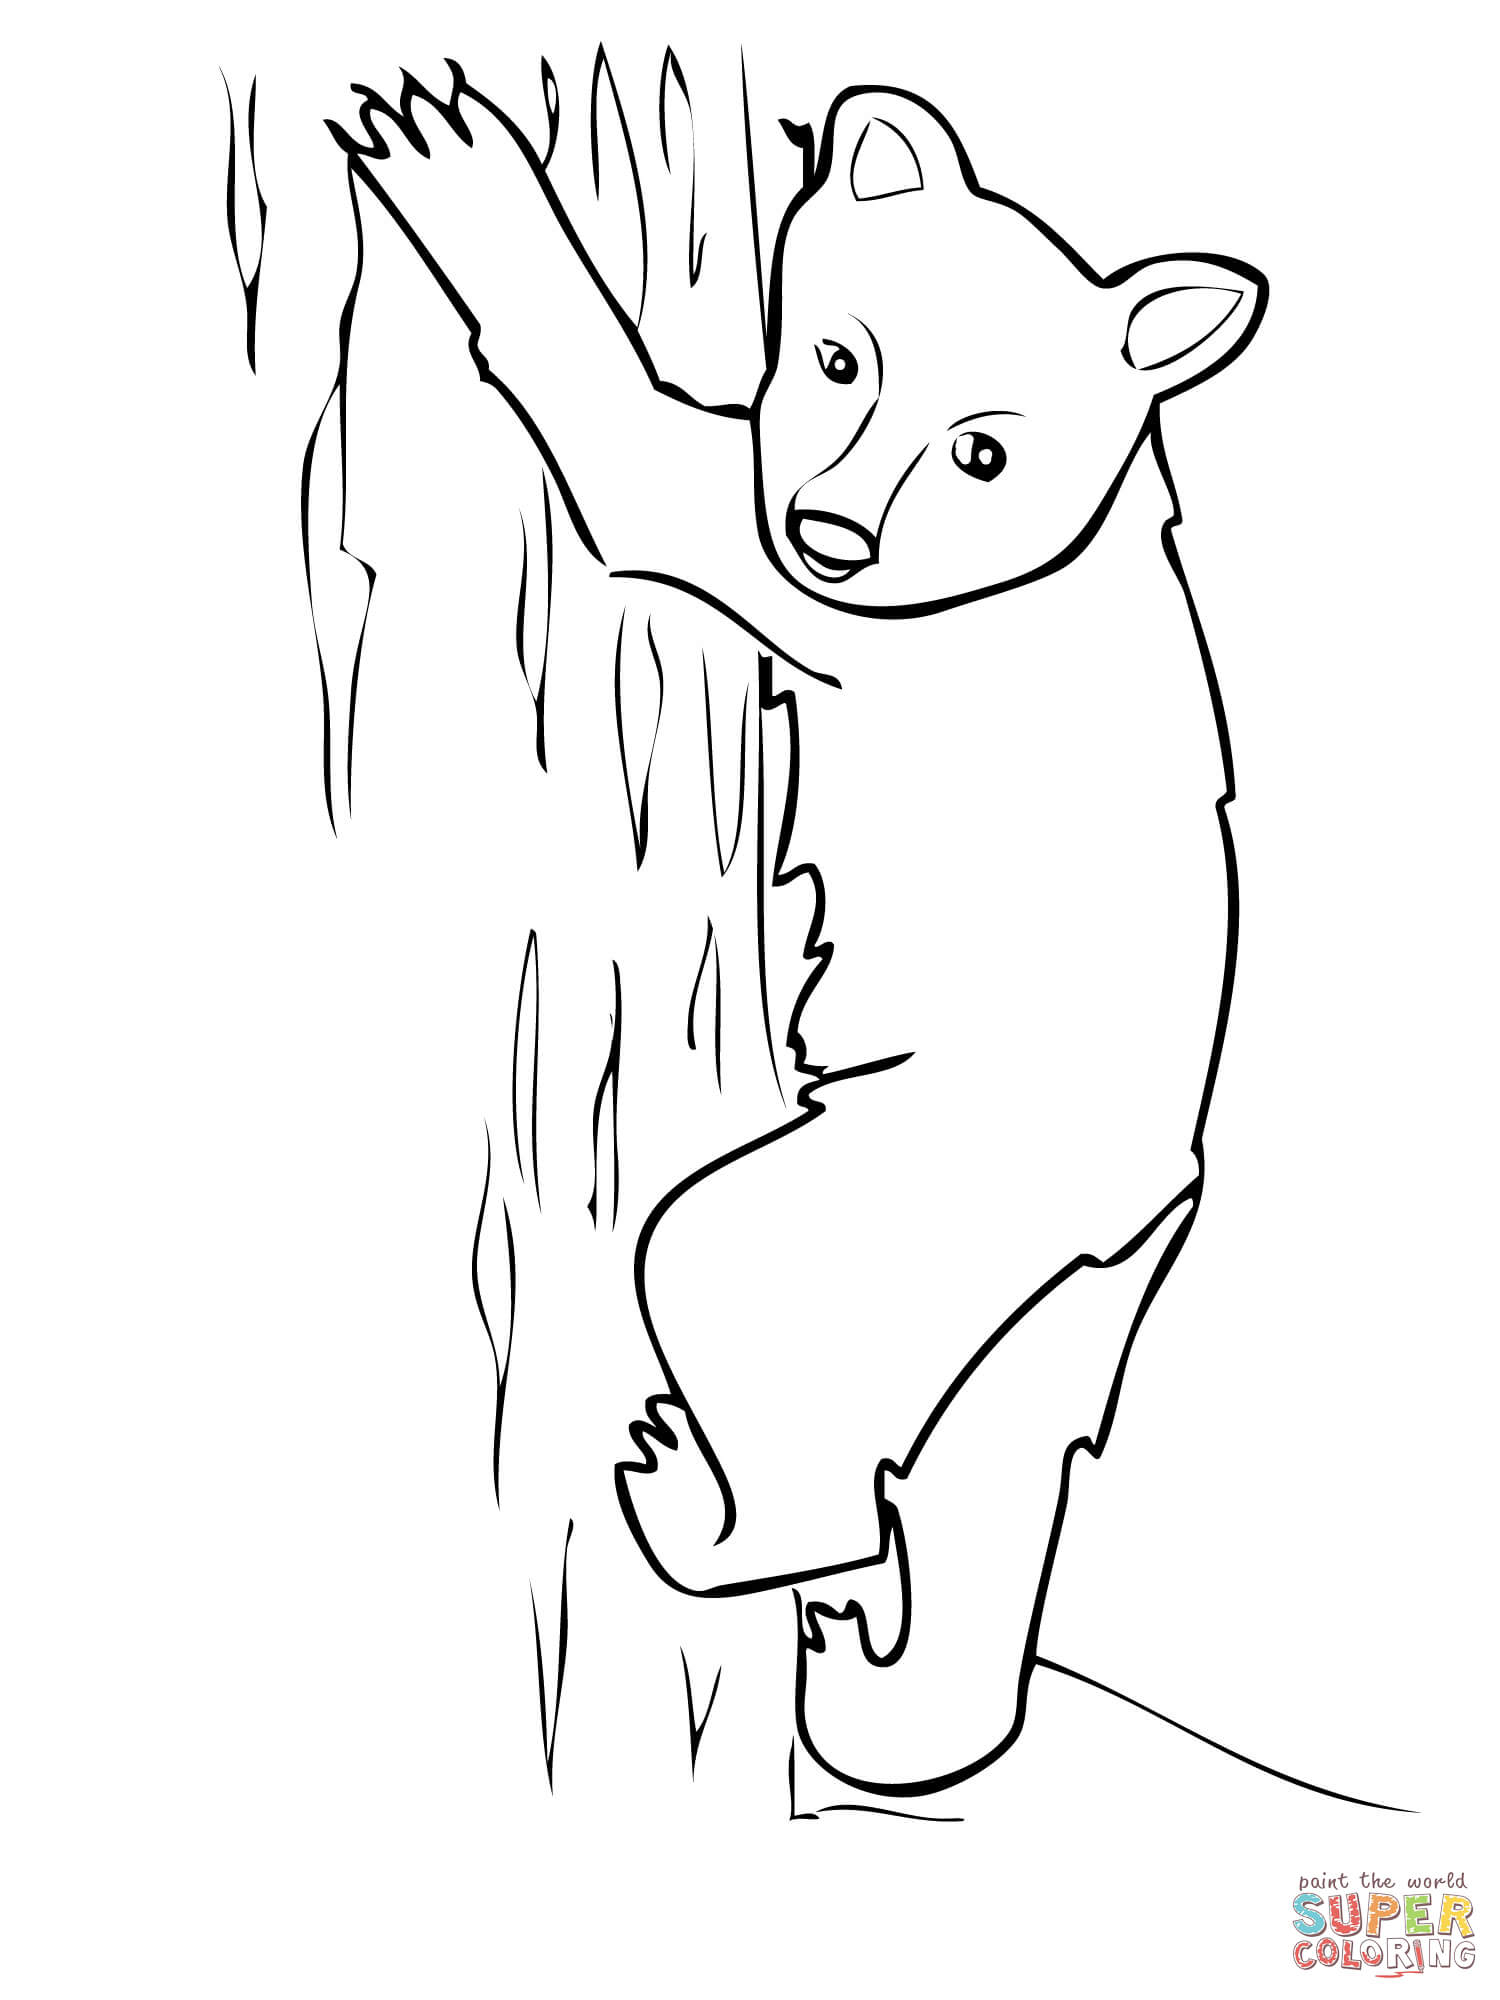 Coloring Pages Of Black Bears American Black Bear Cub Coloring Page Free Printable Coloring Pages